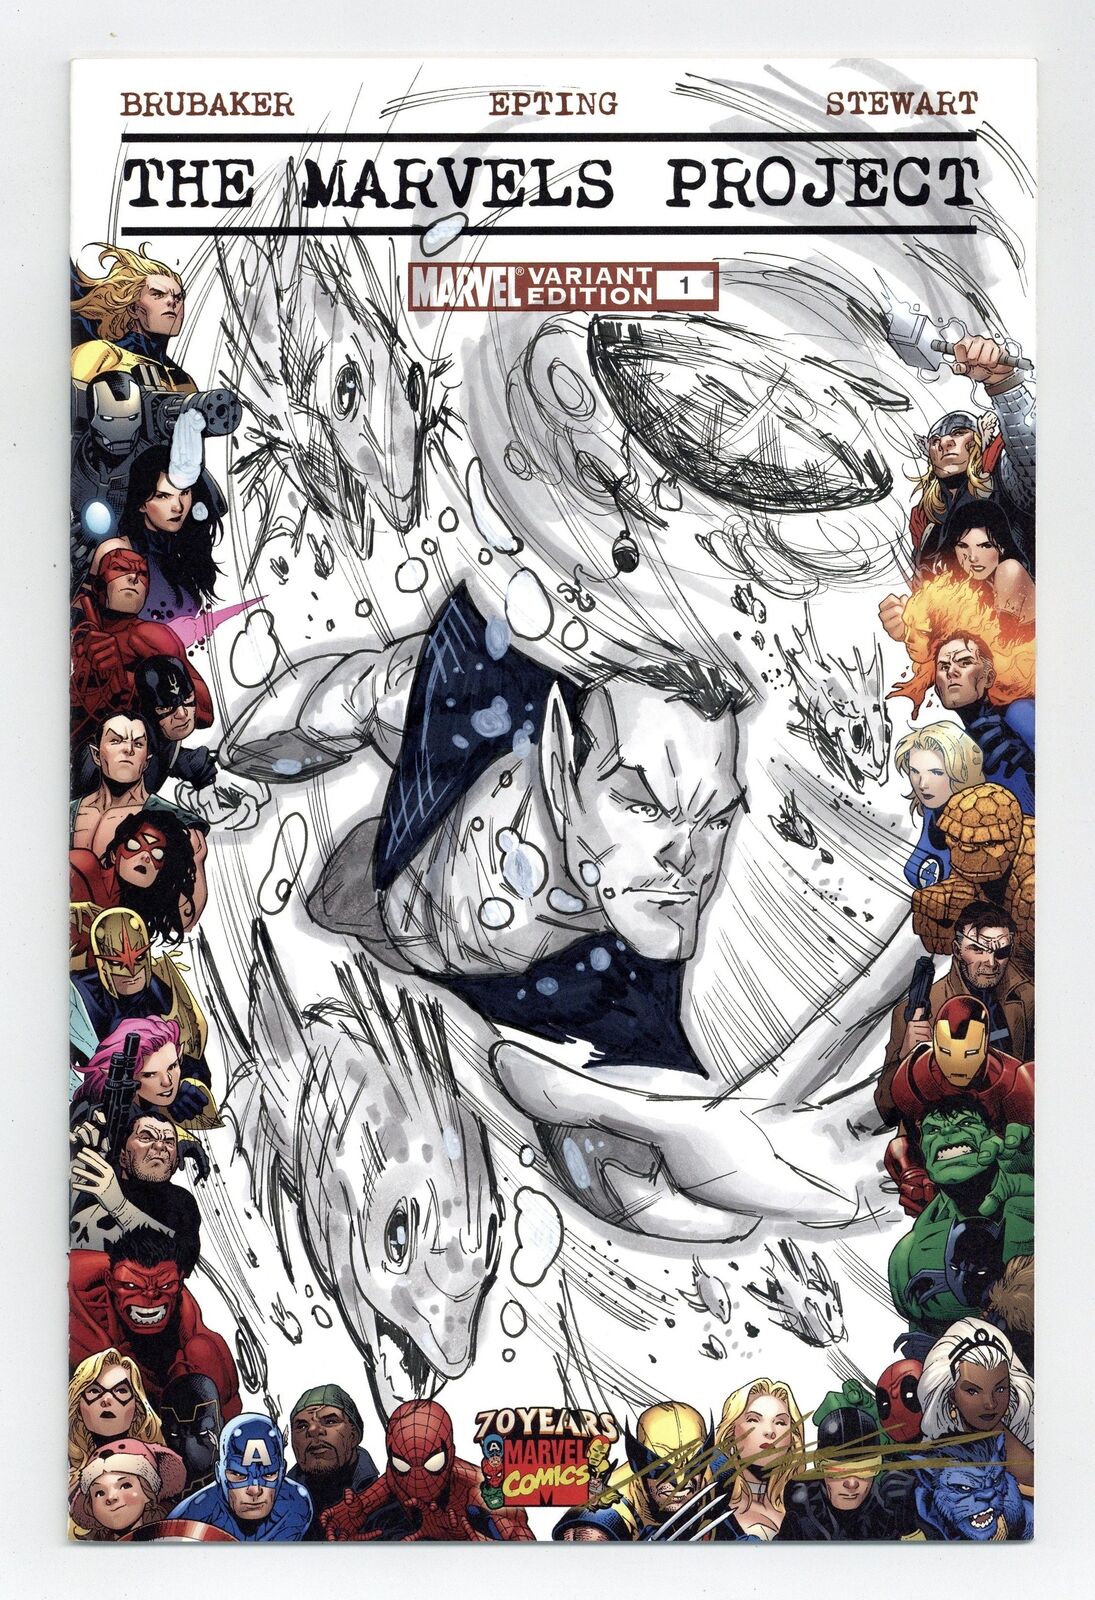 The Marvels Project #1 (2009) Sketch Cover by Mitch Gerads